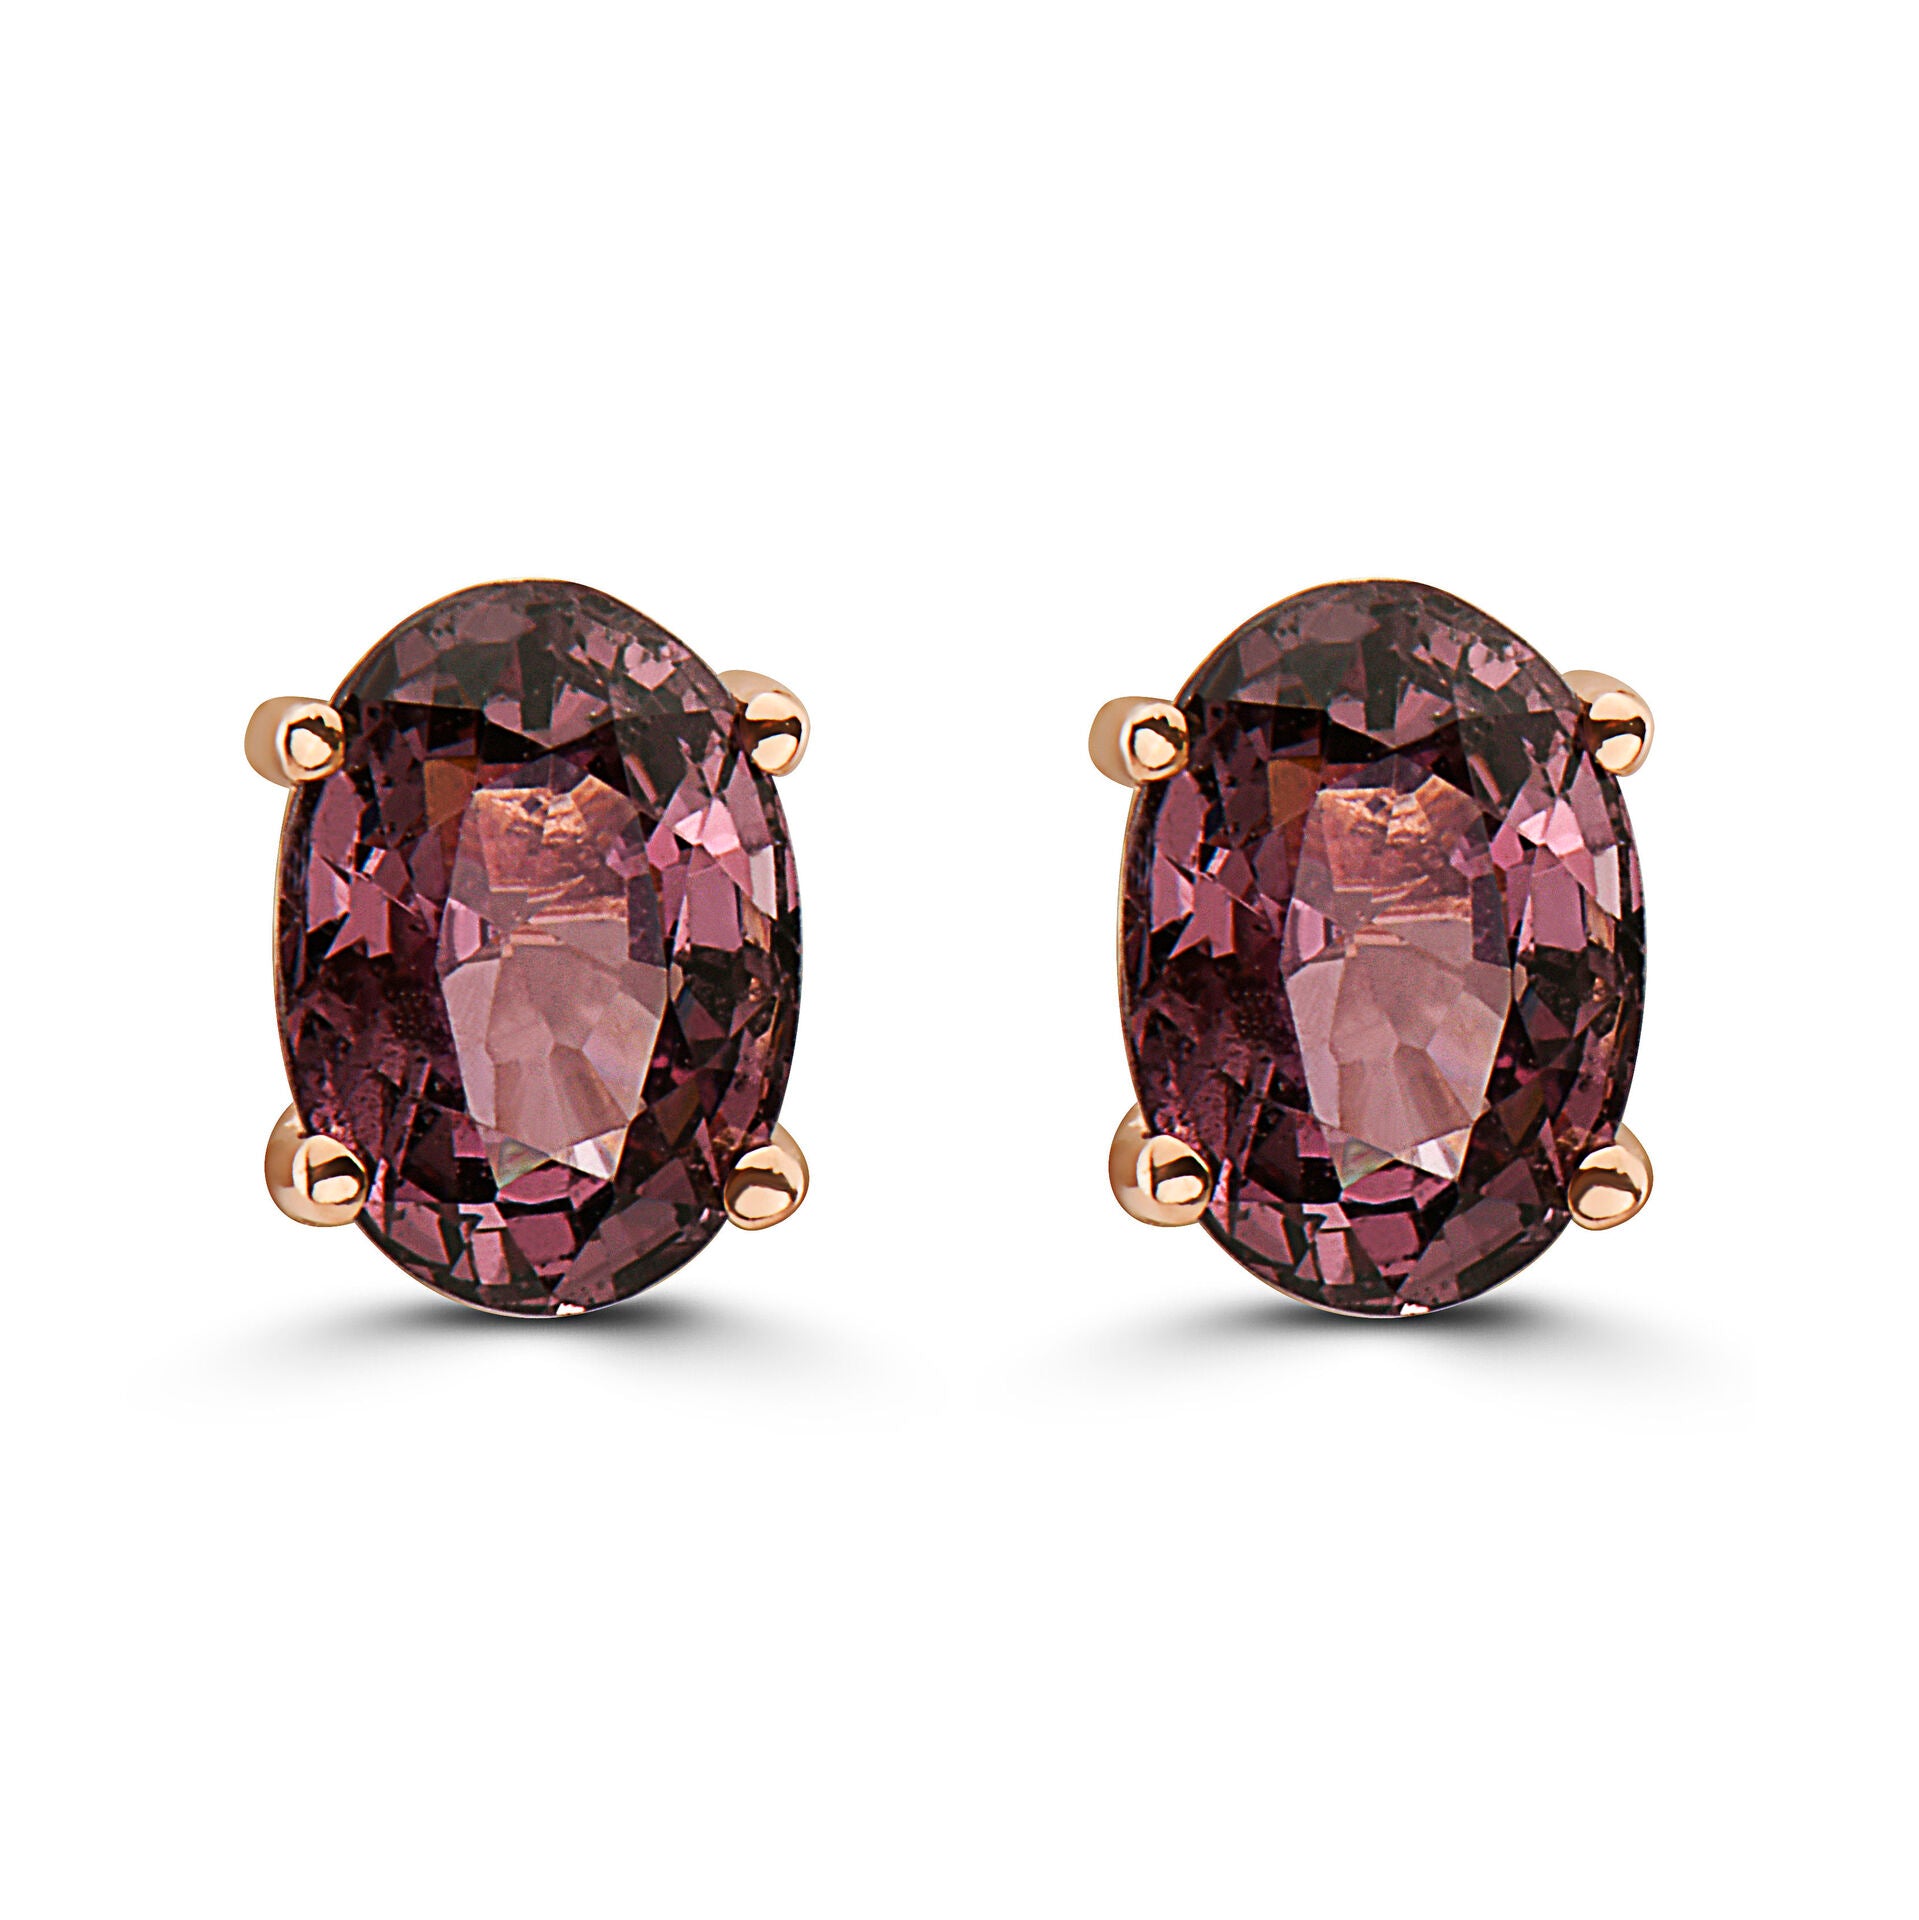 1 5/8 cts Purple Spinel Earrings in 14K Rose Gold by Birthstone